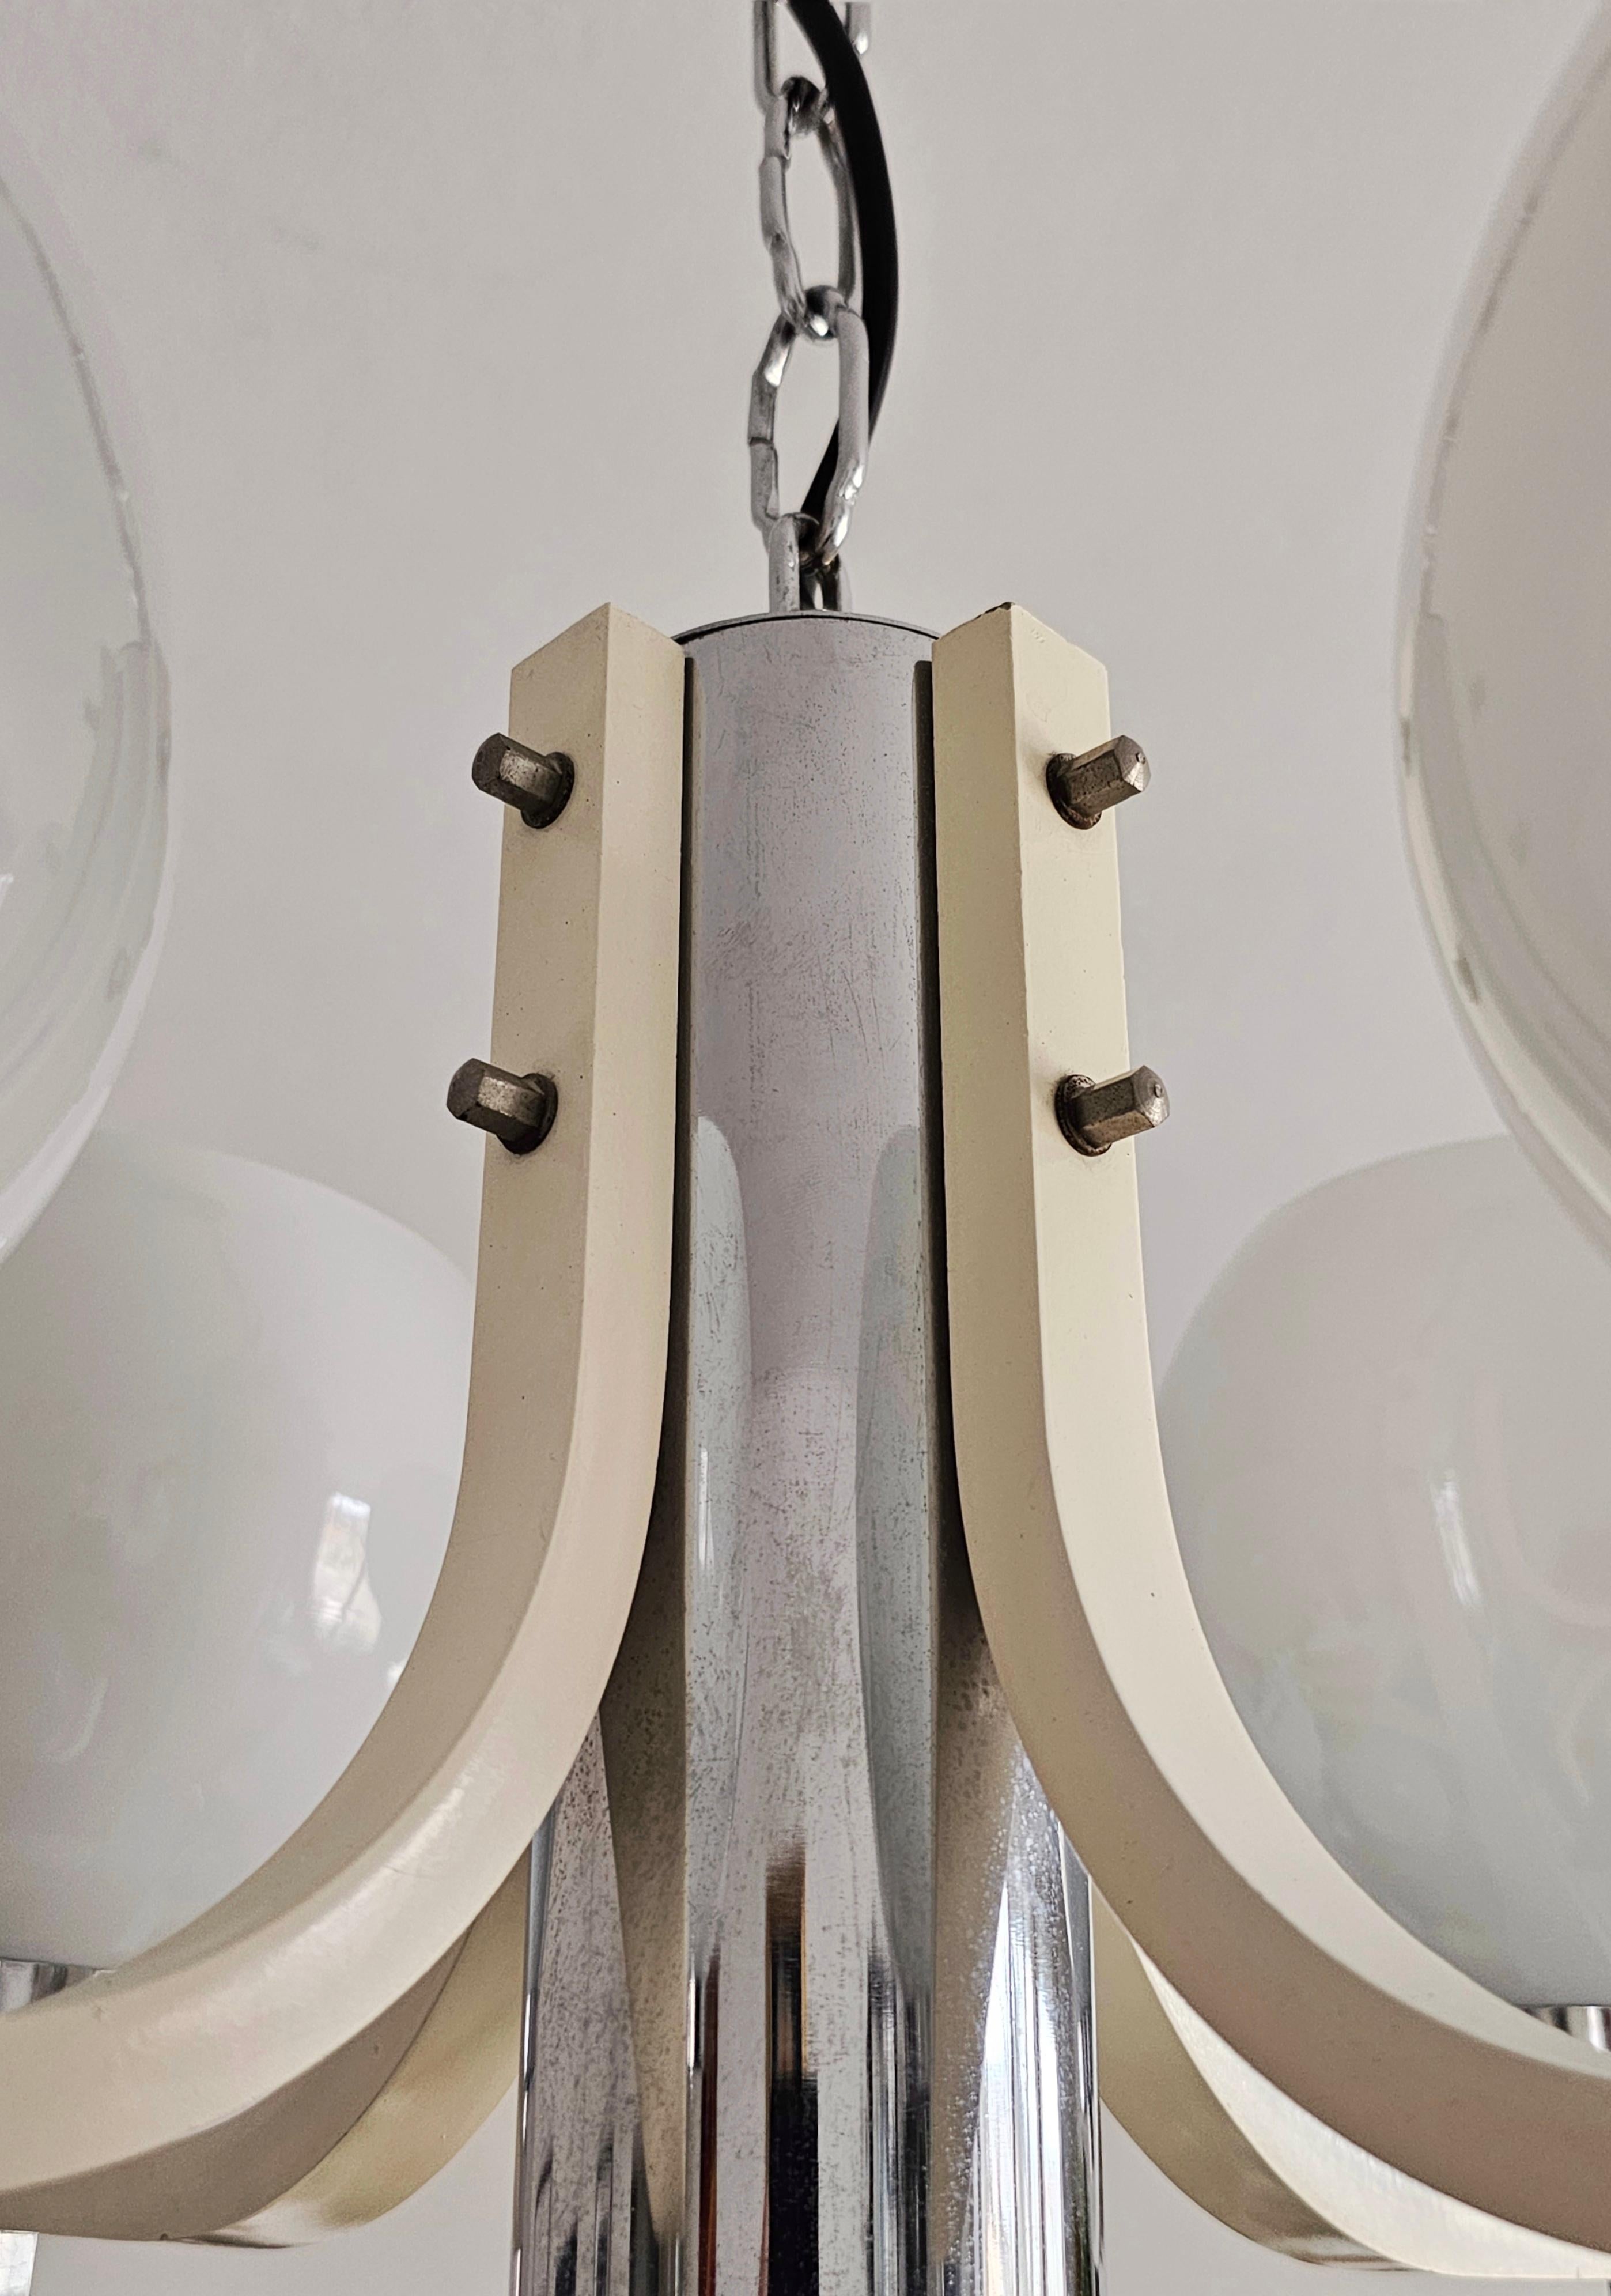 Space Age 8-Light Chandelier with While Glass Shades, Yugoslavia 1970s For Sale 7